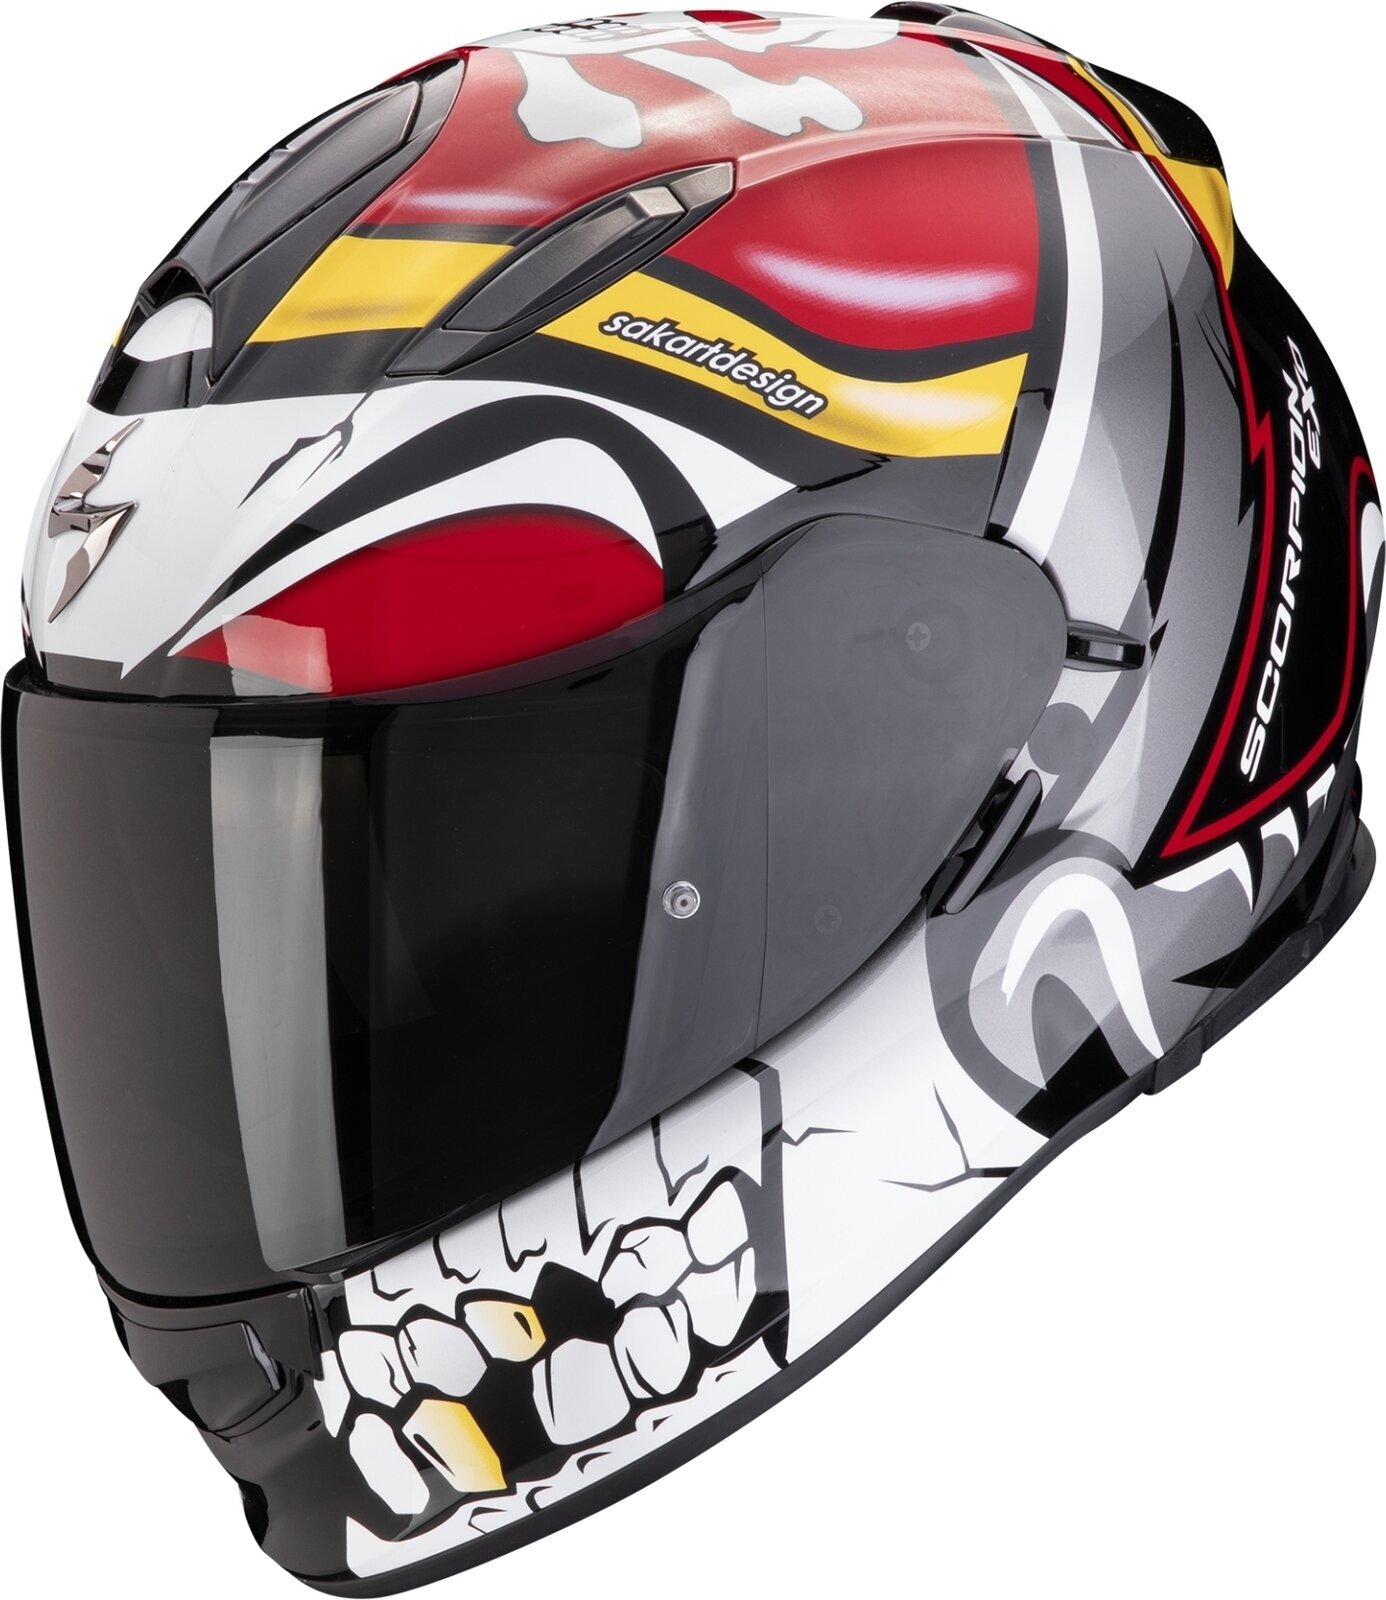 Helm Scorpion EXO 491 PIRATE Red XL Helm